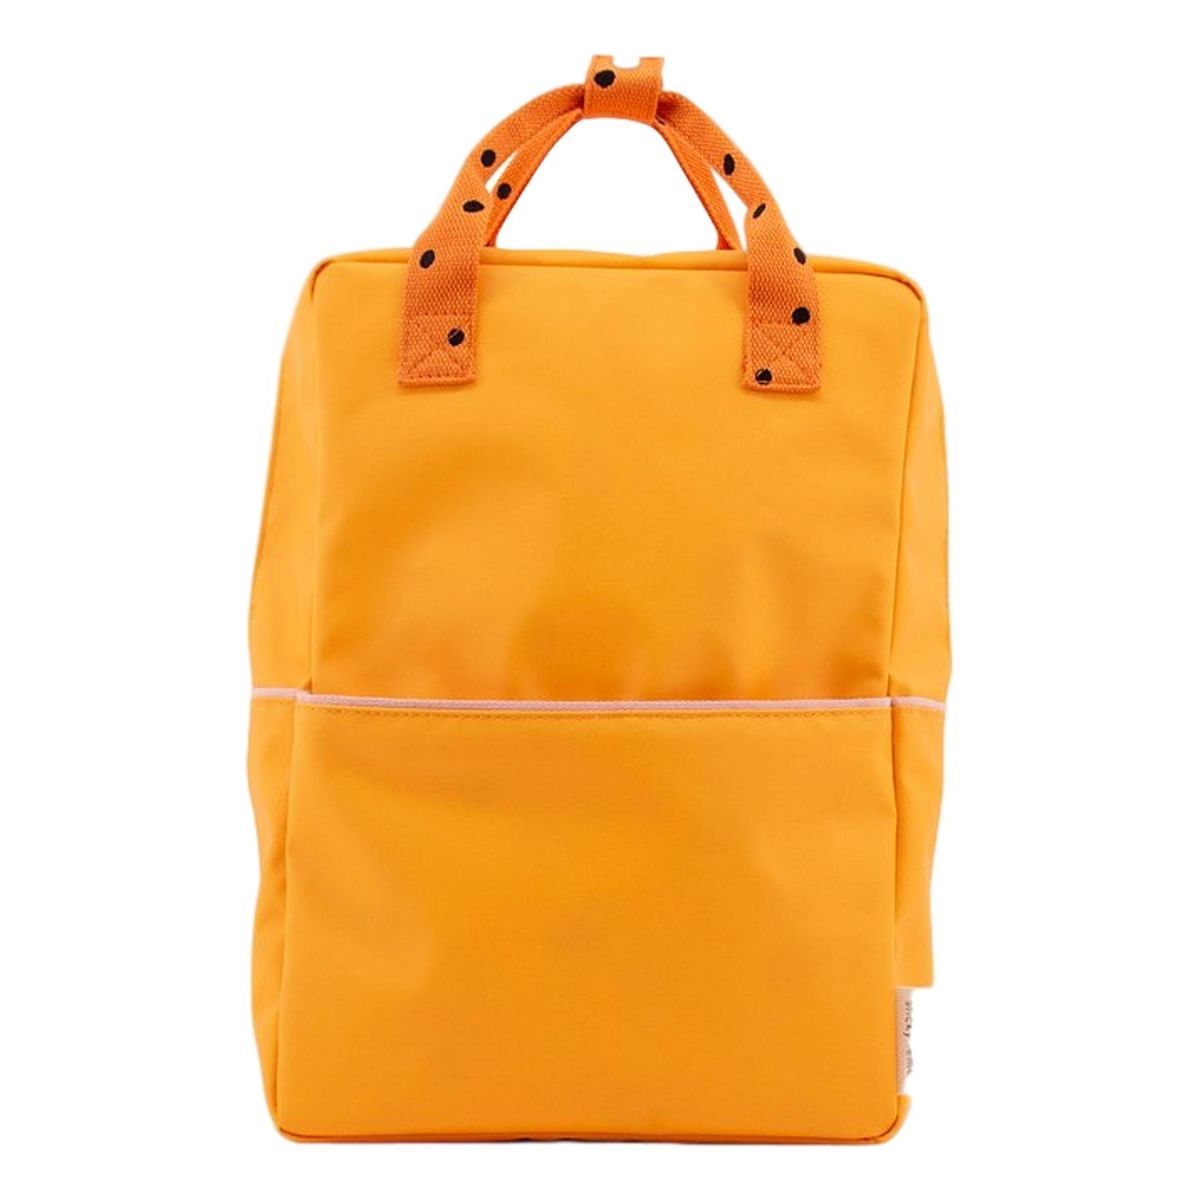 Sticky Lemon Backpack large / Freckles Sunny yellow Sacs à dos